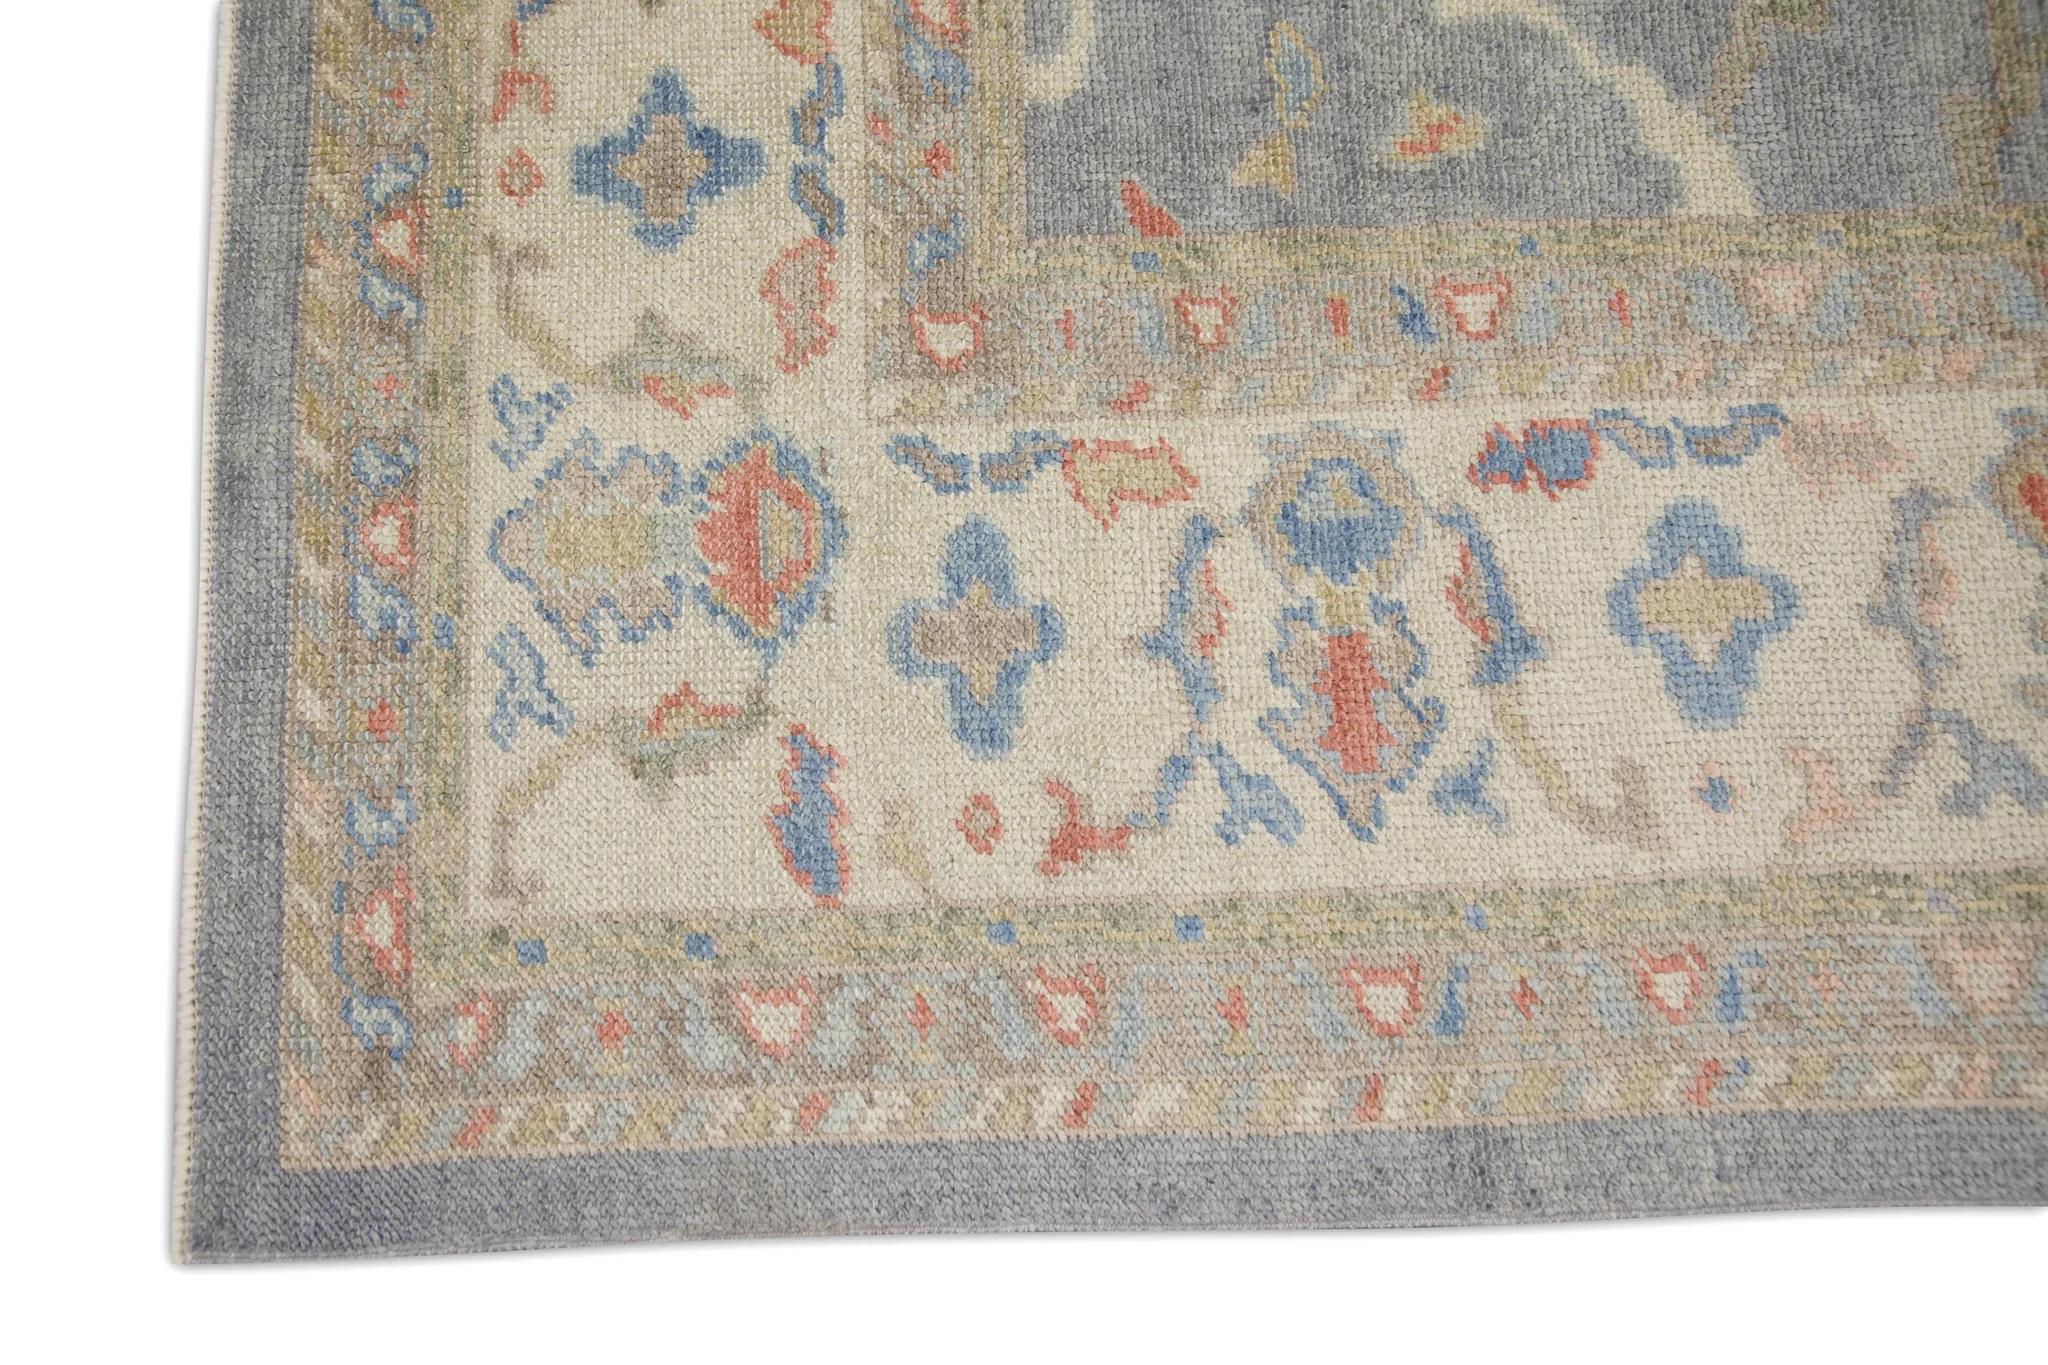 Vegetable Dyed Blue Handwoven Wool Turkish Oushak Rug in Multicolor Floral Pattern 8' x 8'11